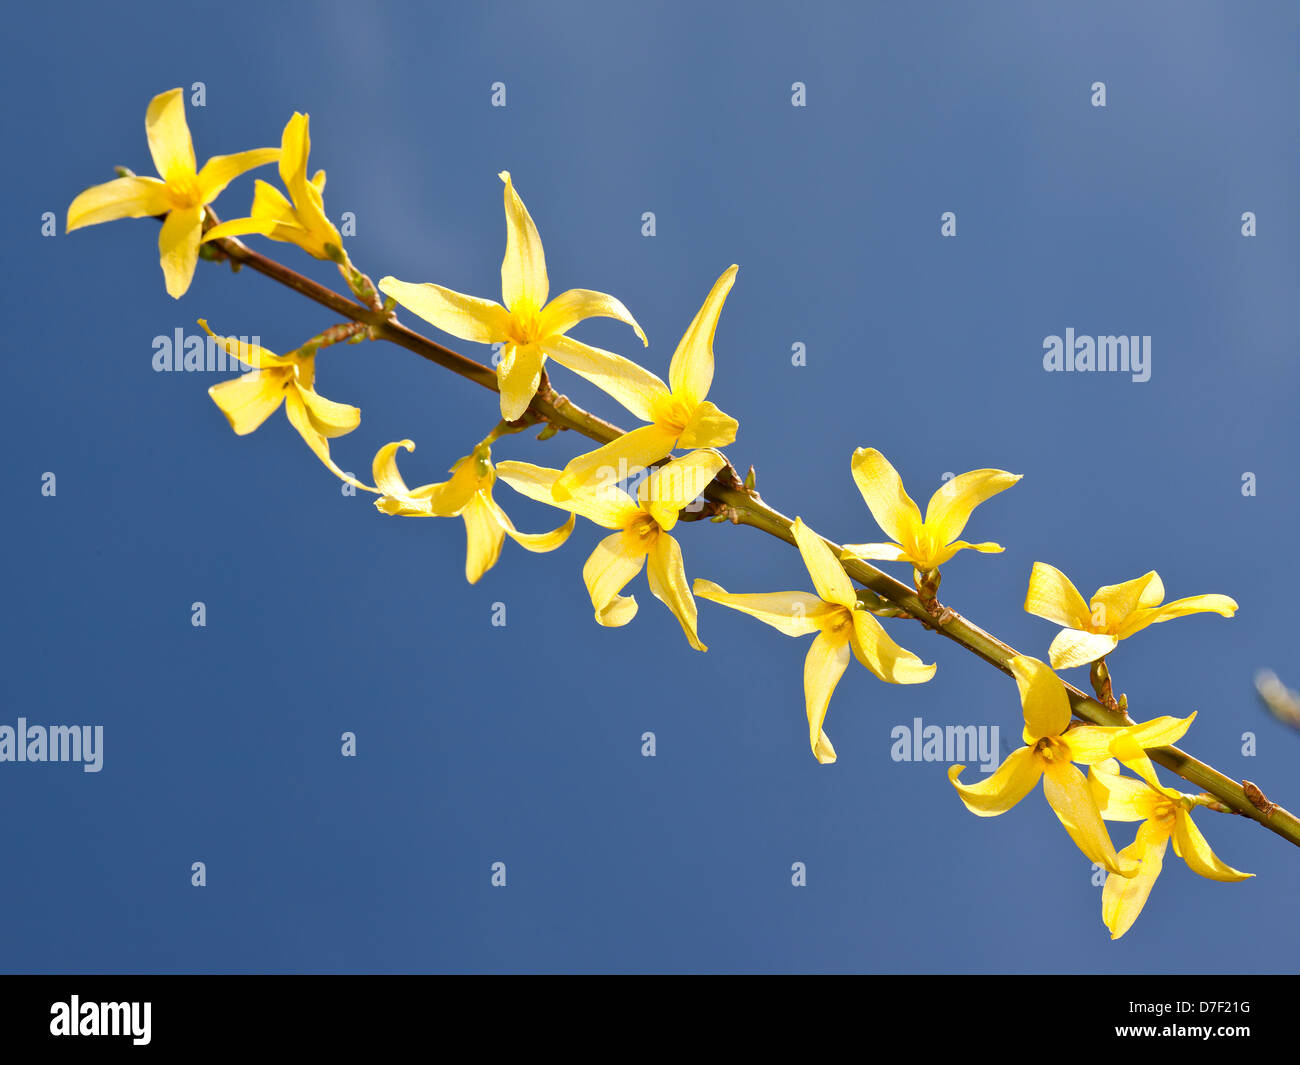 A branch of Forsythia x intermedia (Border Forsythia) with bright yellow flowers against light blue background (sky) Stock Photo